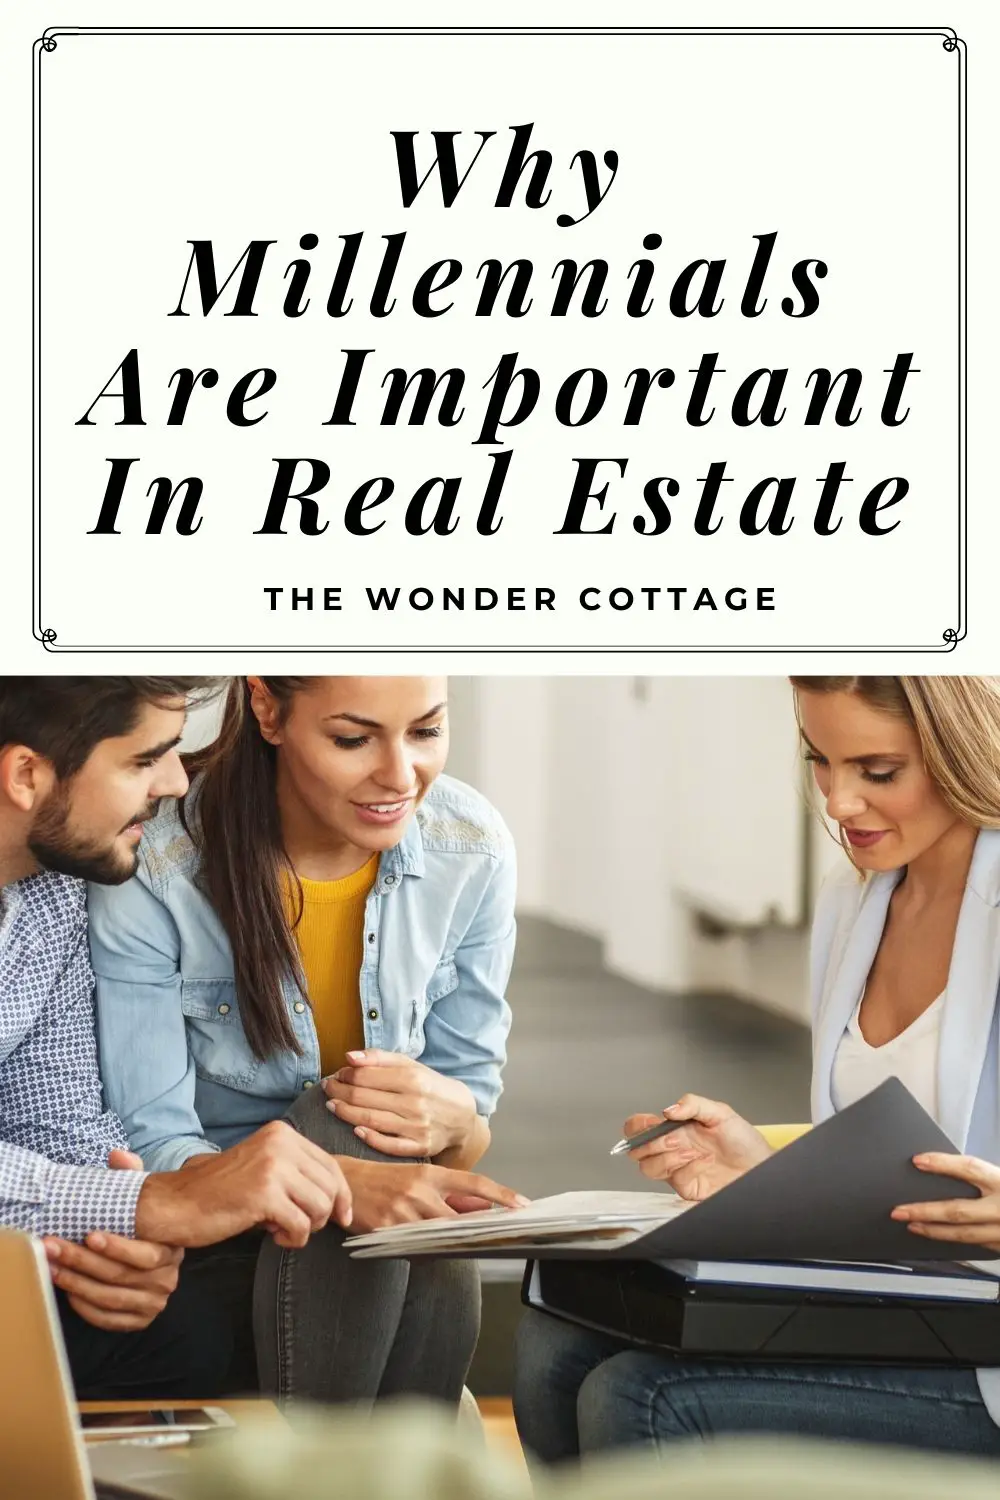 Why millennials are important in real estate